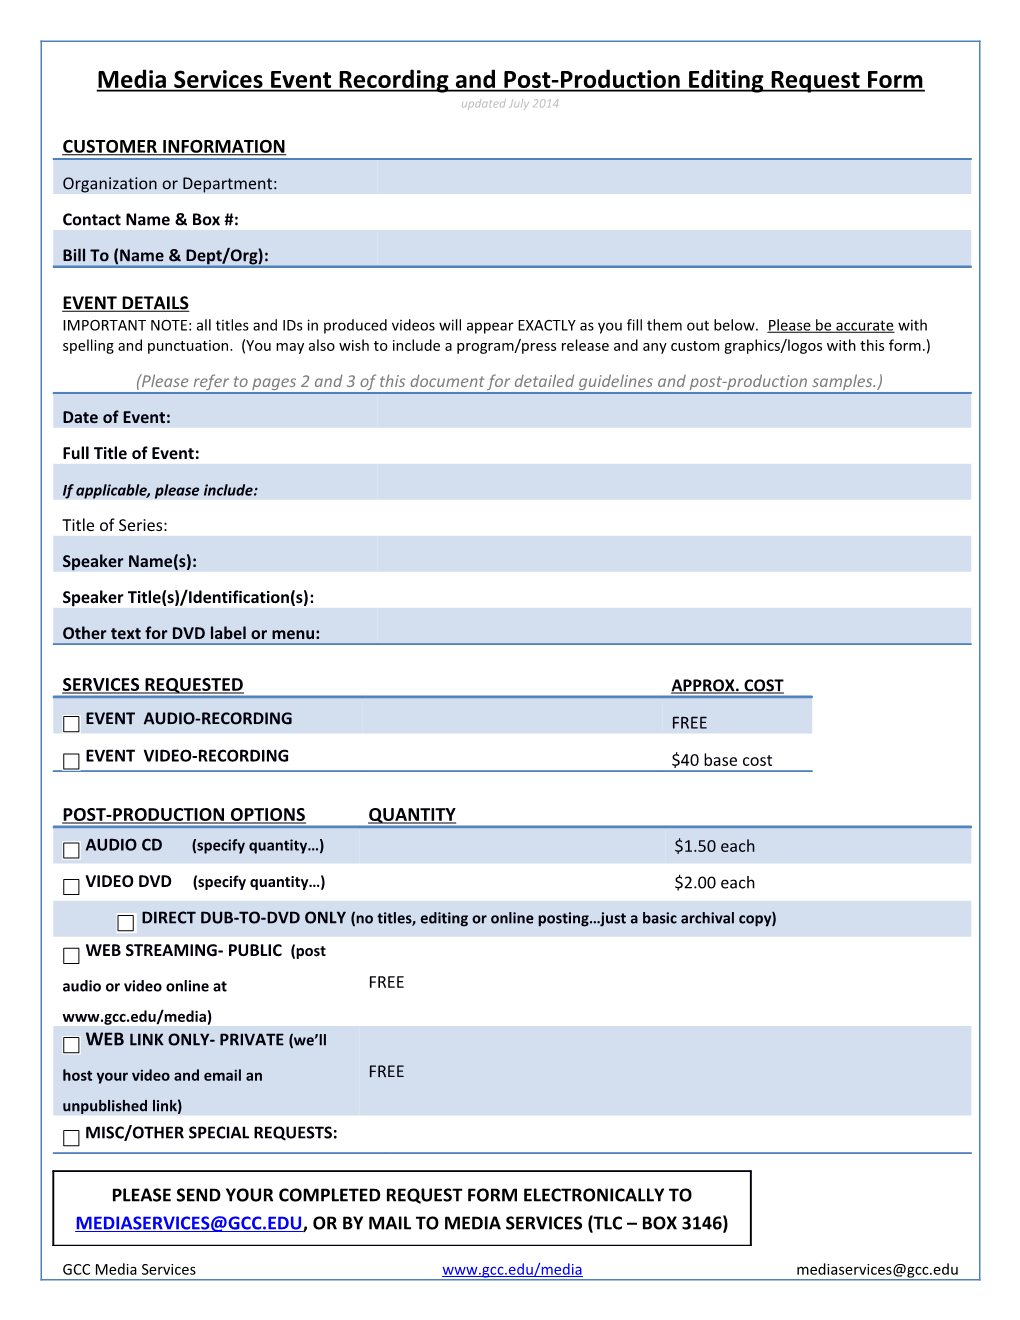 Media Services Event Recordingand Post-Production Editing Request Form